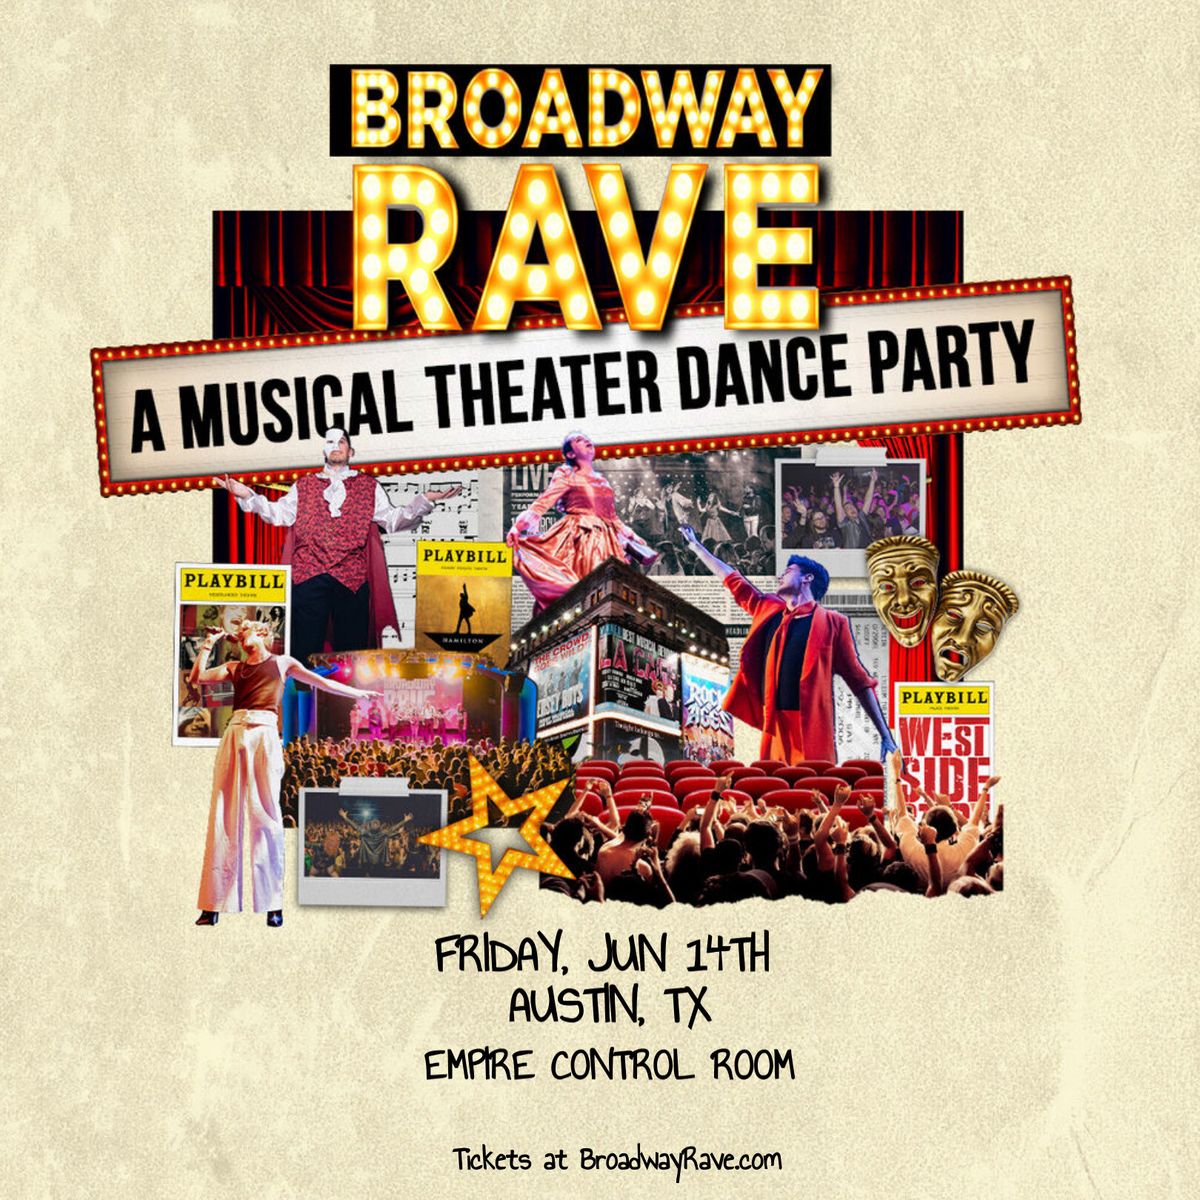 Empire Presents: Broadway Rave - A Musical Theater Dance Party in the Control Room